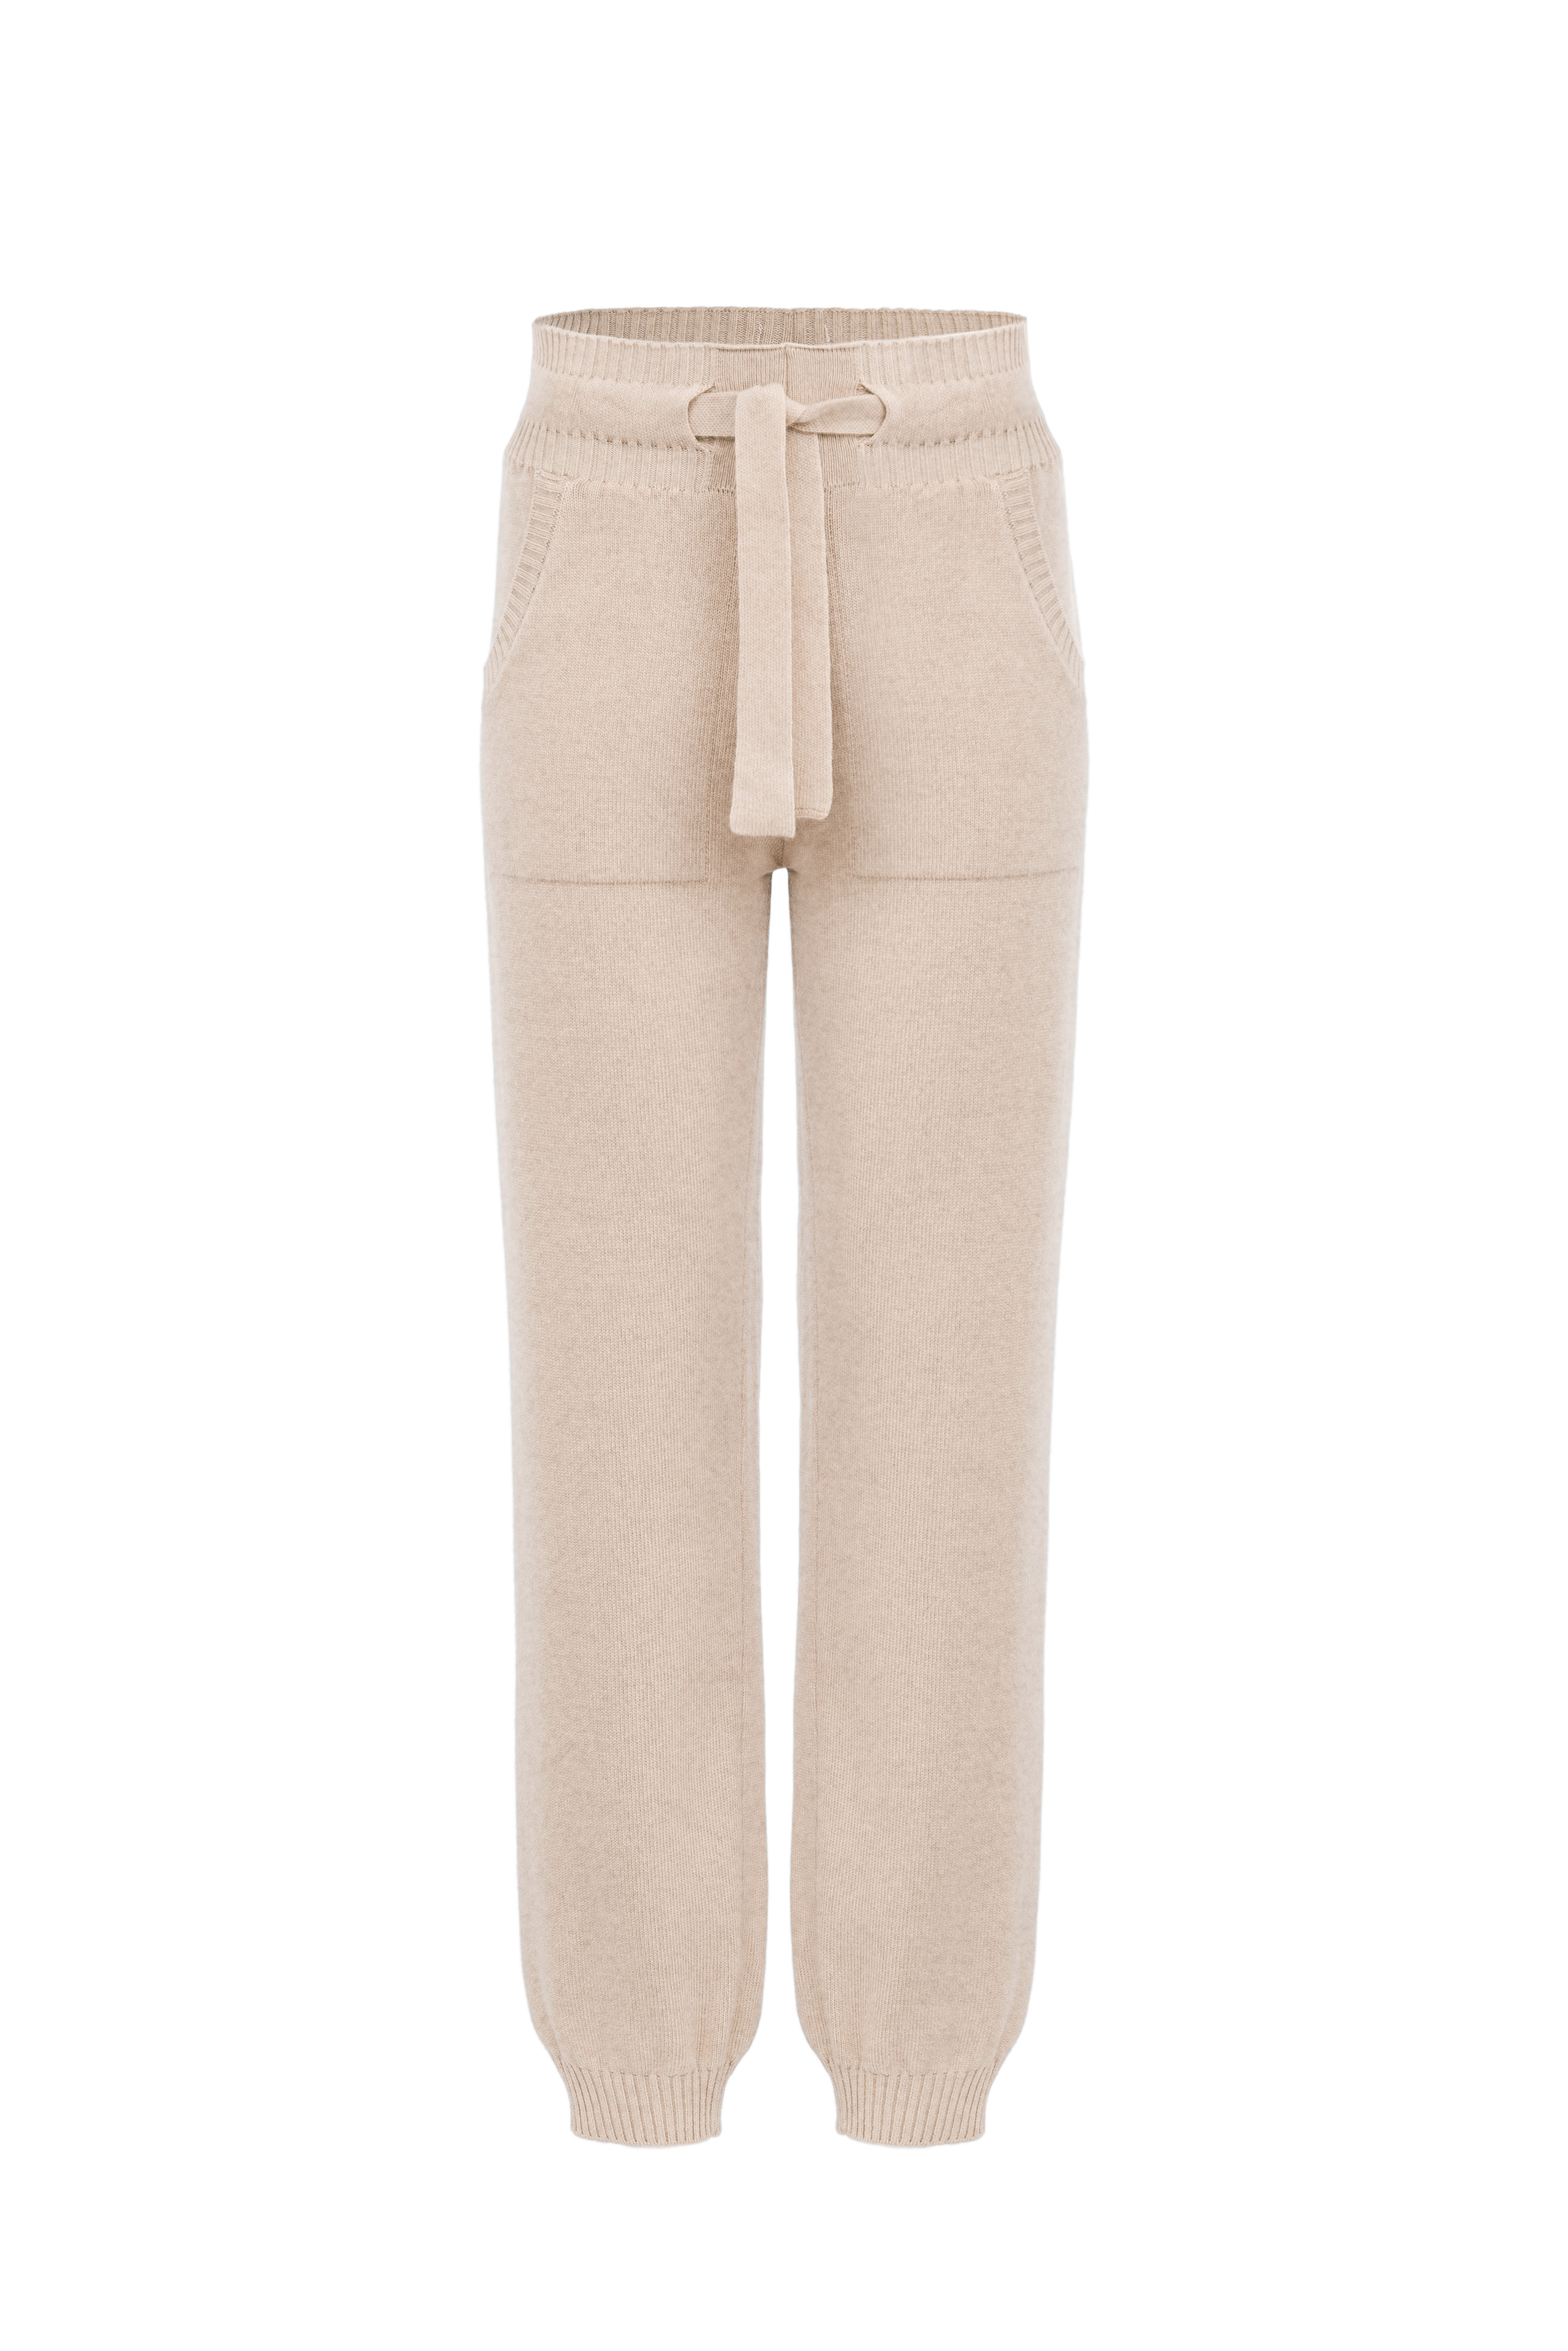 Trousers 3161-45 Beige from BRUSNiKA